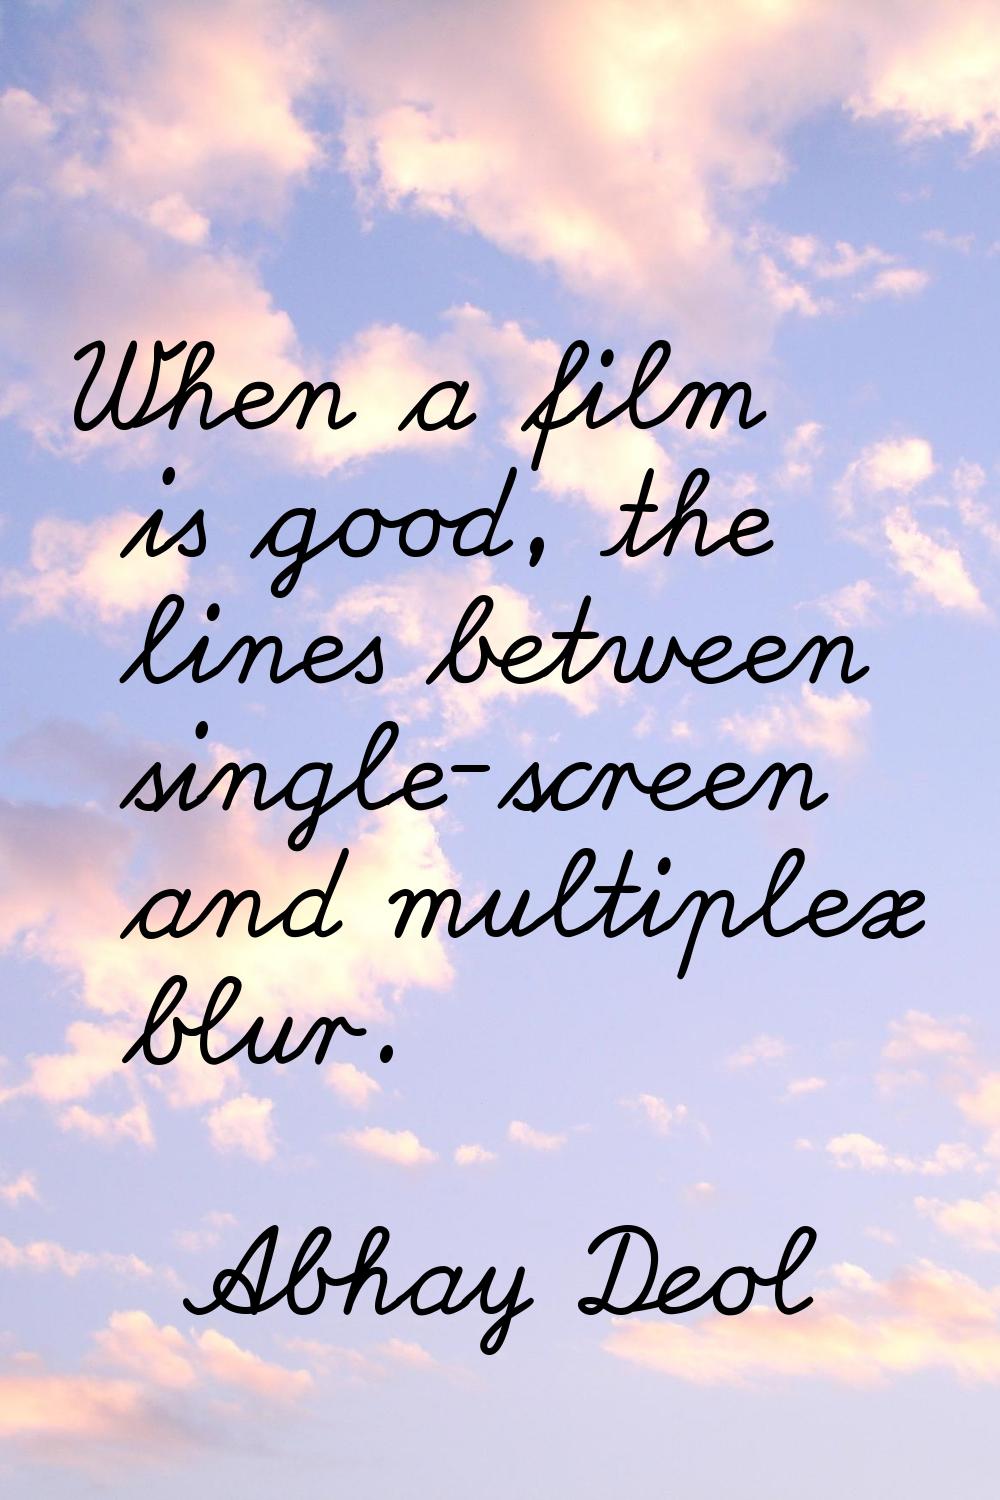 When a film is good, the lines between single-screen and multiplex blur.